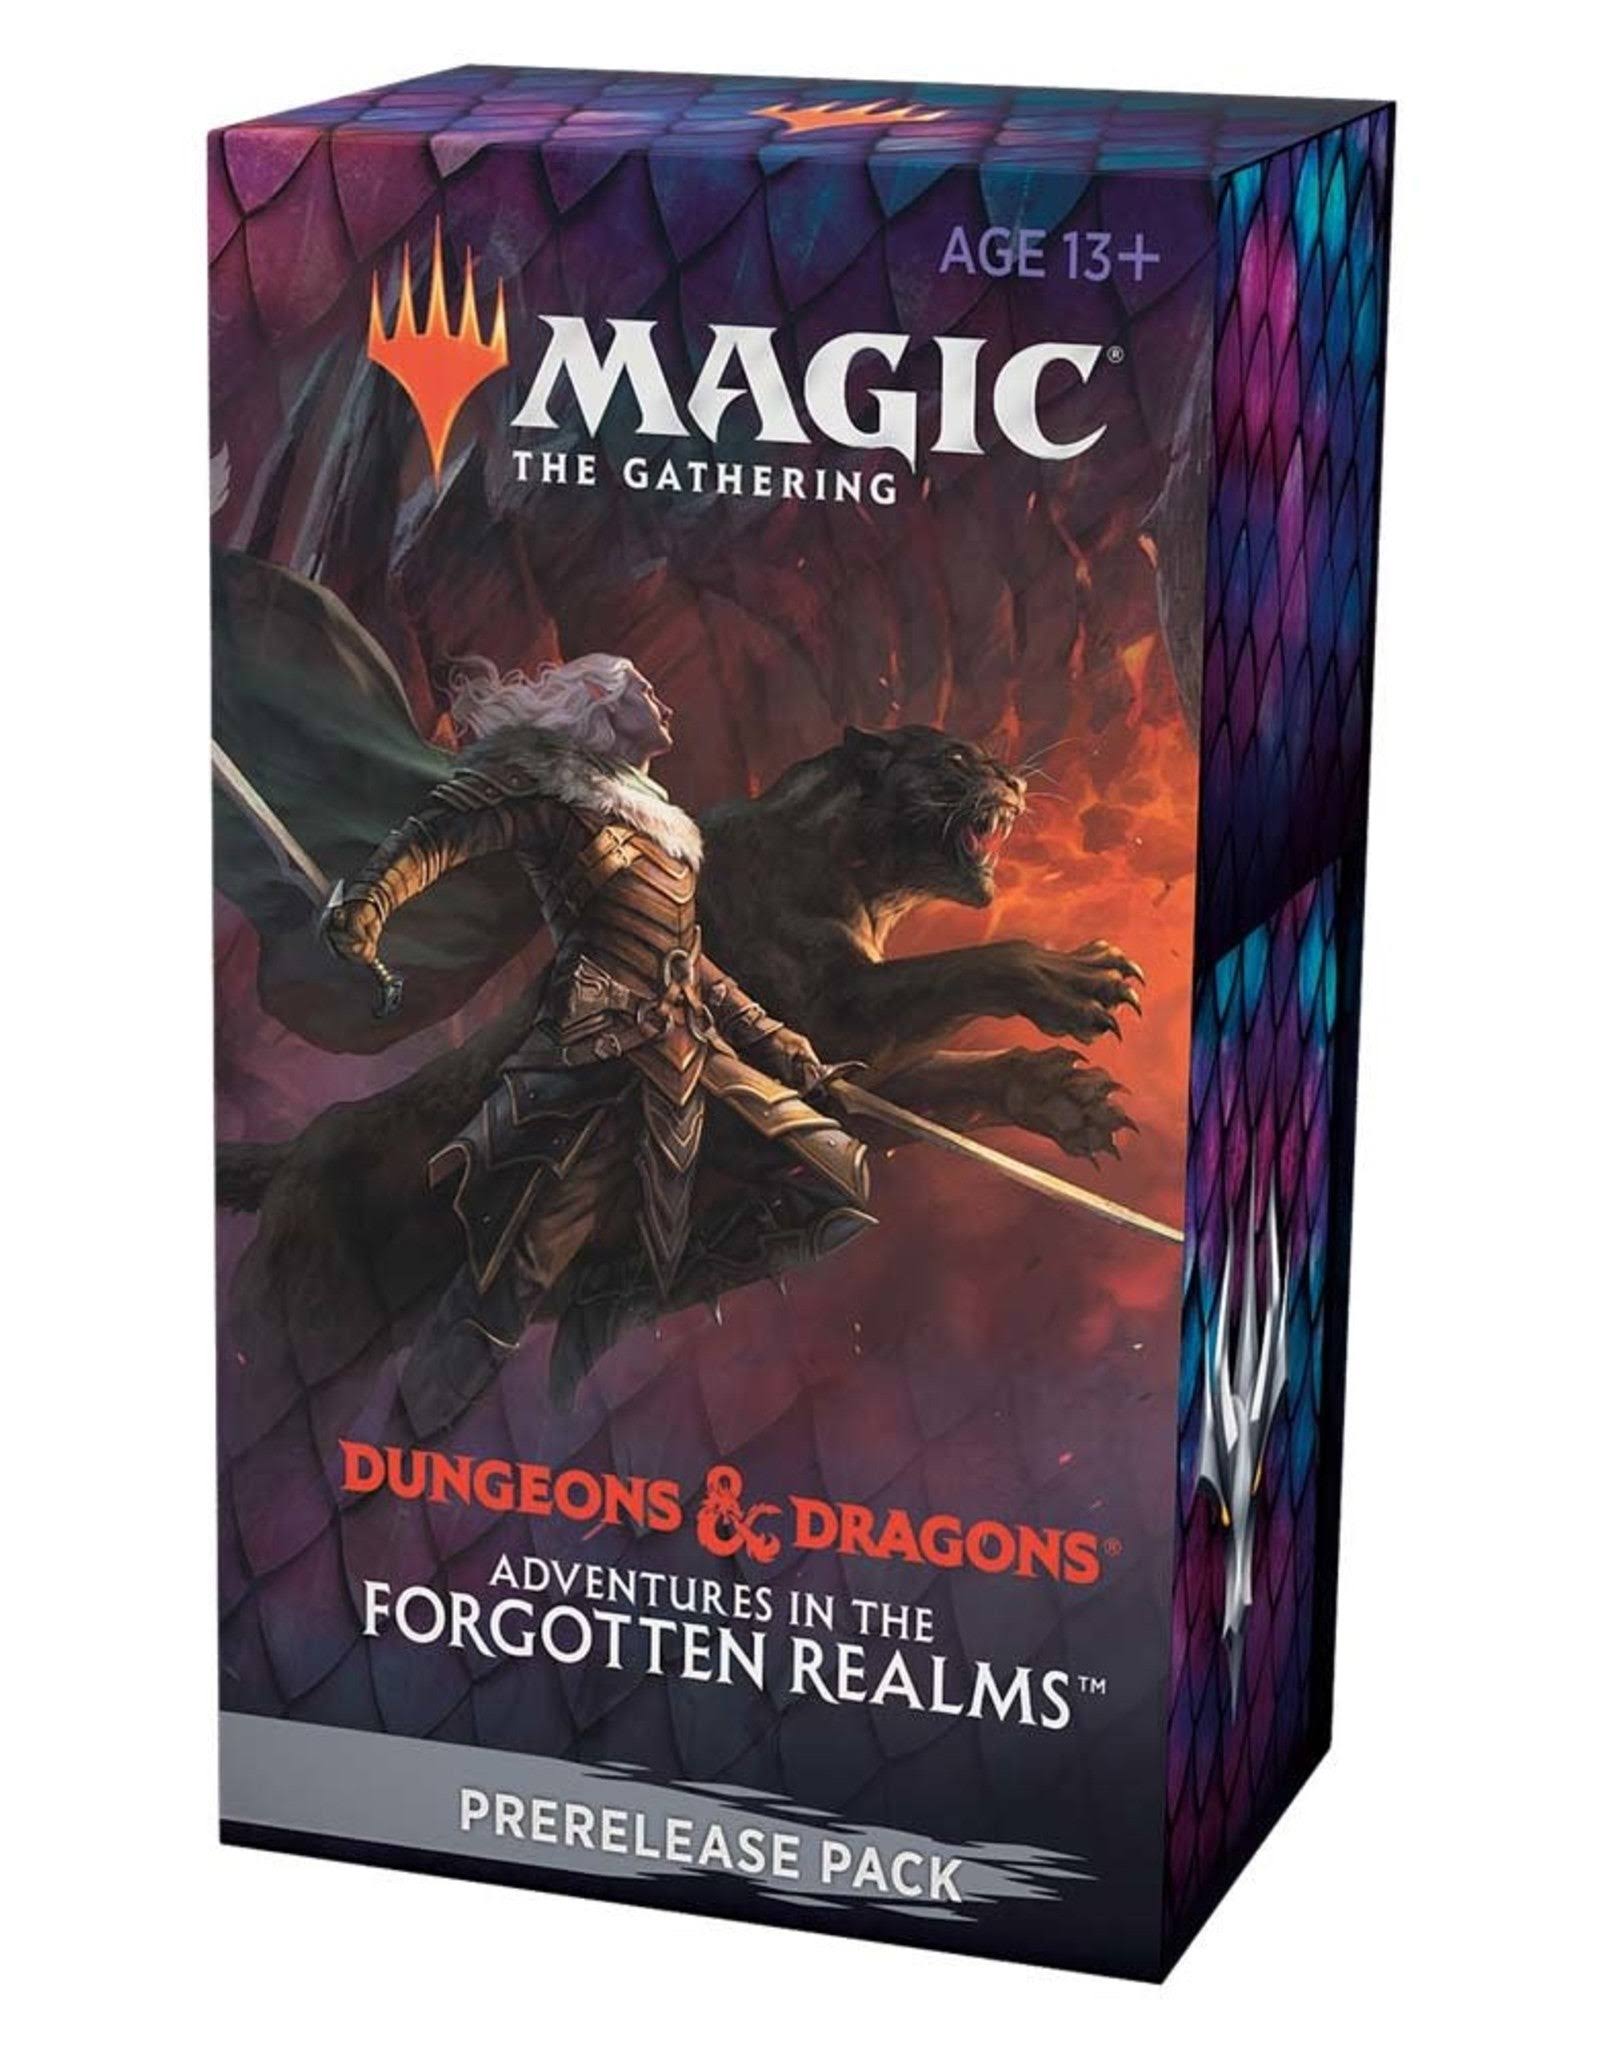 Magic The Gathering Adventures in The Forgotten Realms Prerelease Pack